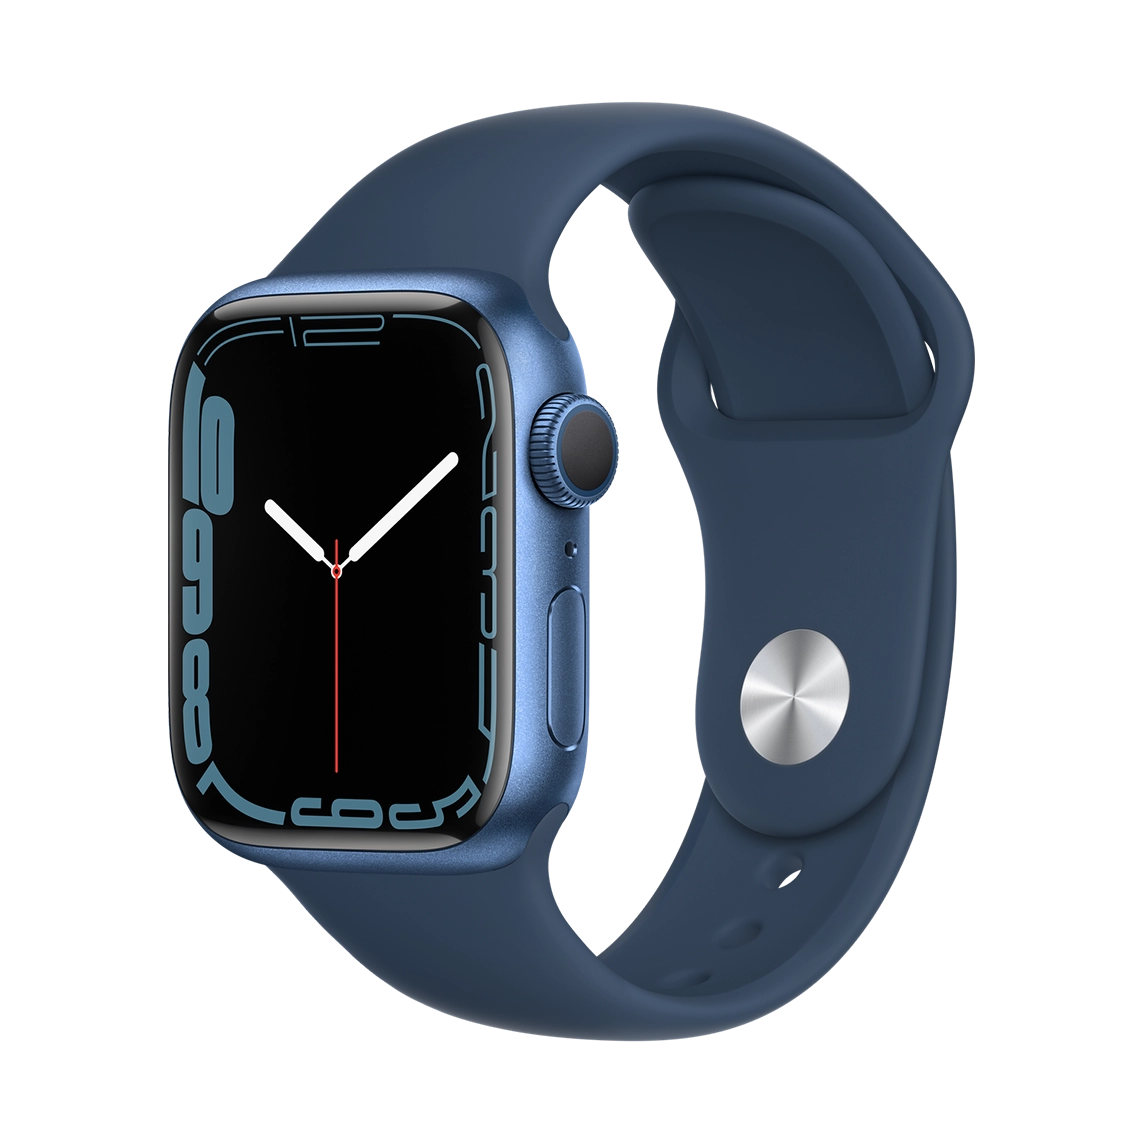 Apple-Watch-Series-7-Blue-Aluminum-Case-with-Abyss-Blue